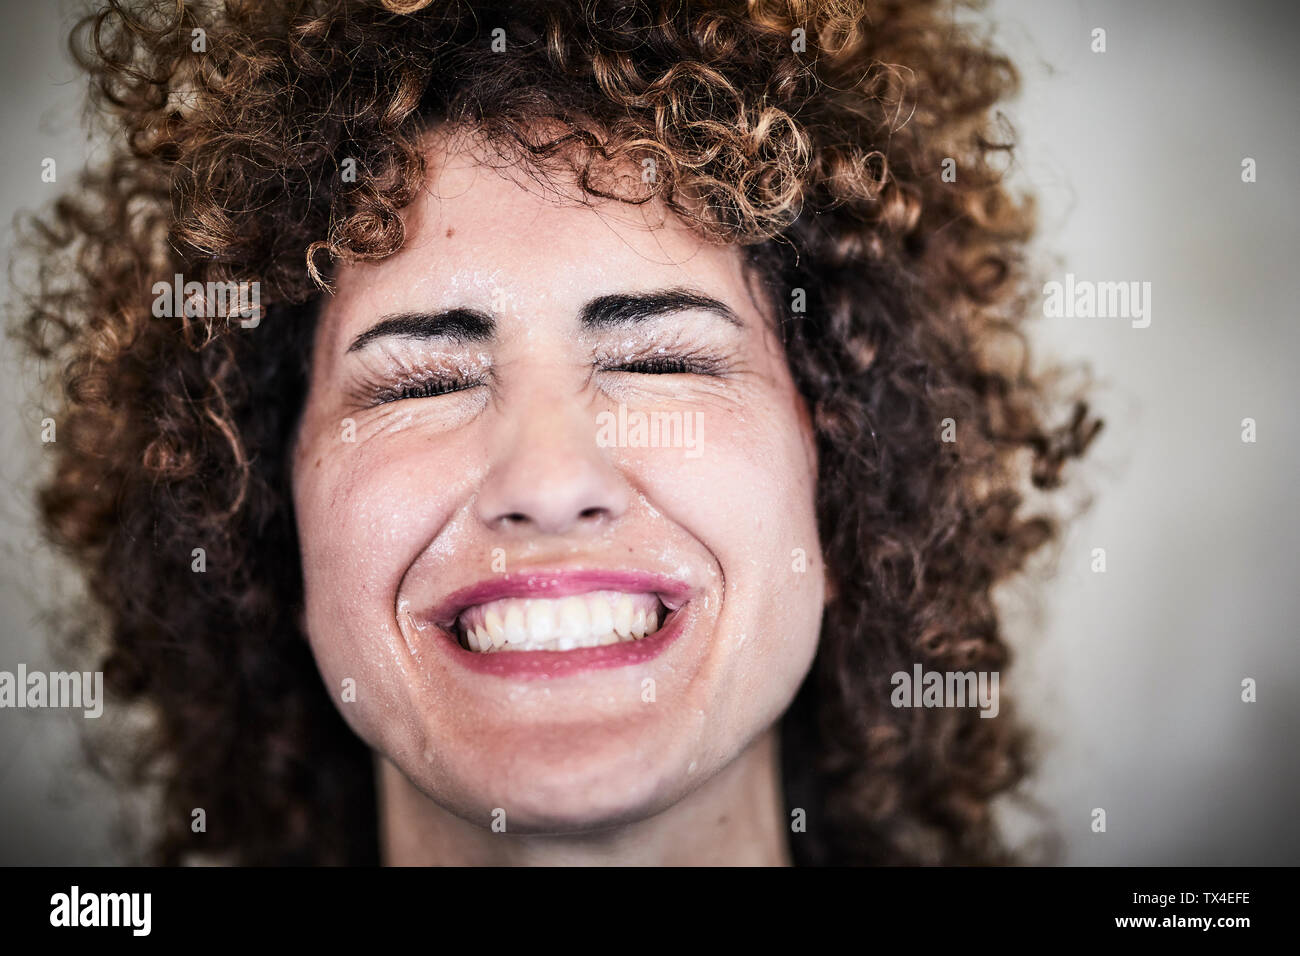 Portrait of sweating woman with curly hair Stock Photo - Alamy